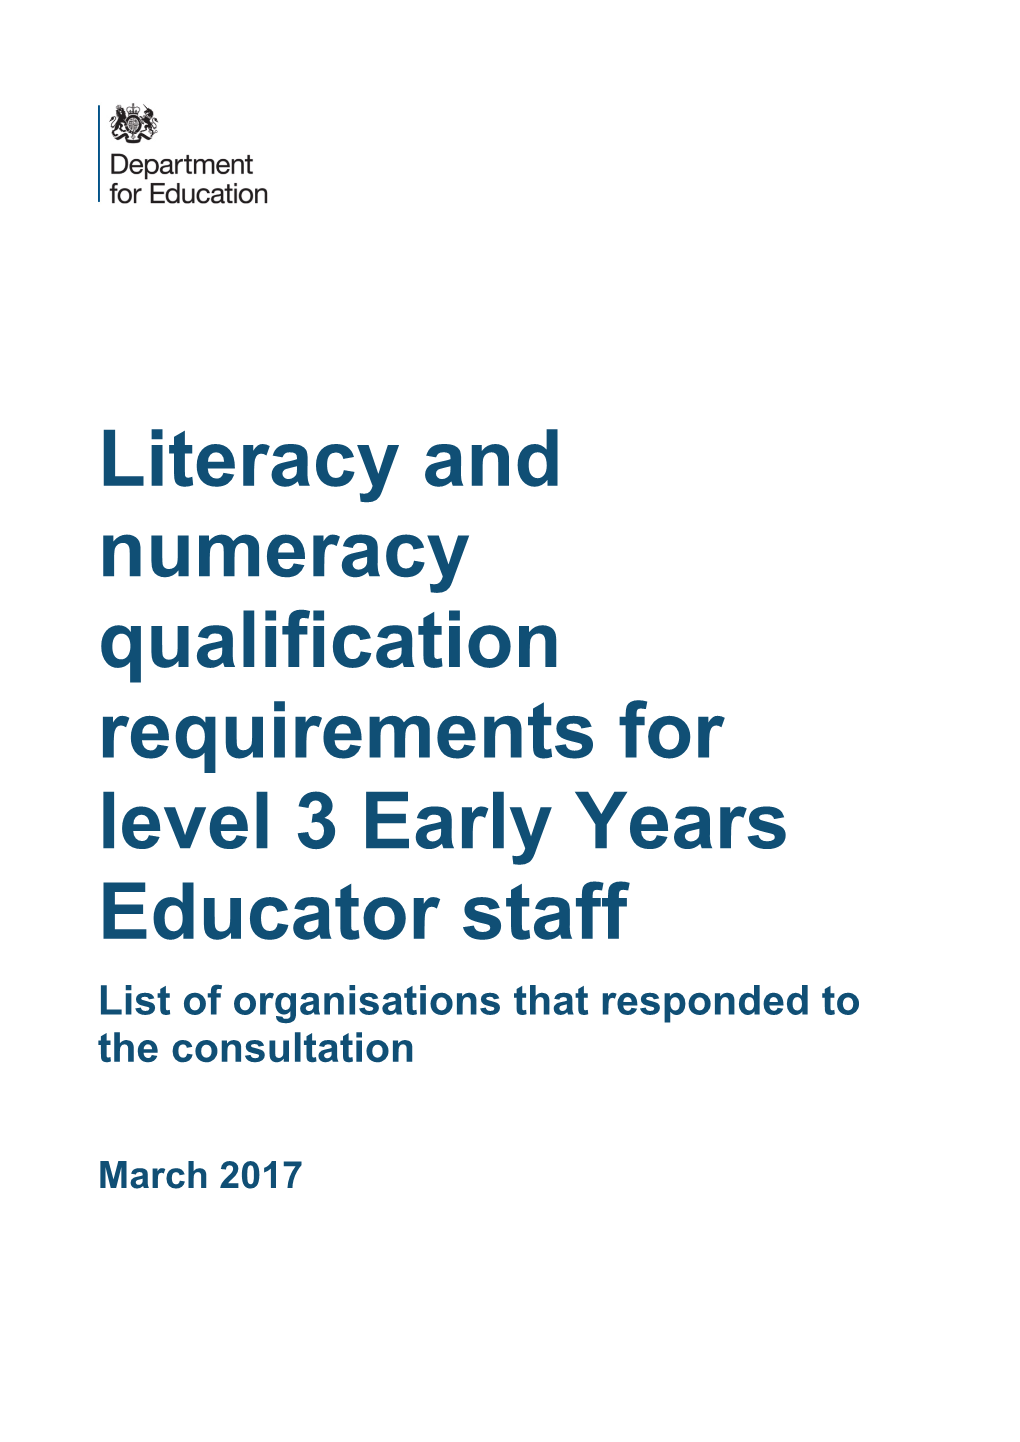 Literacy and Numeracy Qualification Requirements for Level 3 Early Years Educator Staff List of Organisations That Responded to the Consultation